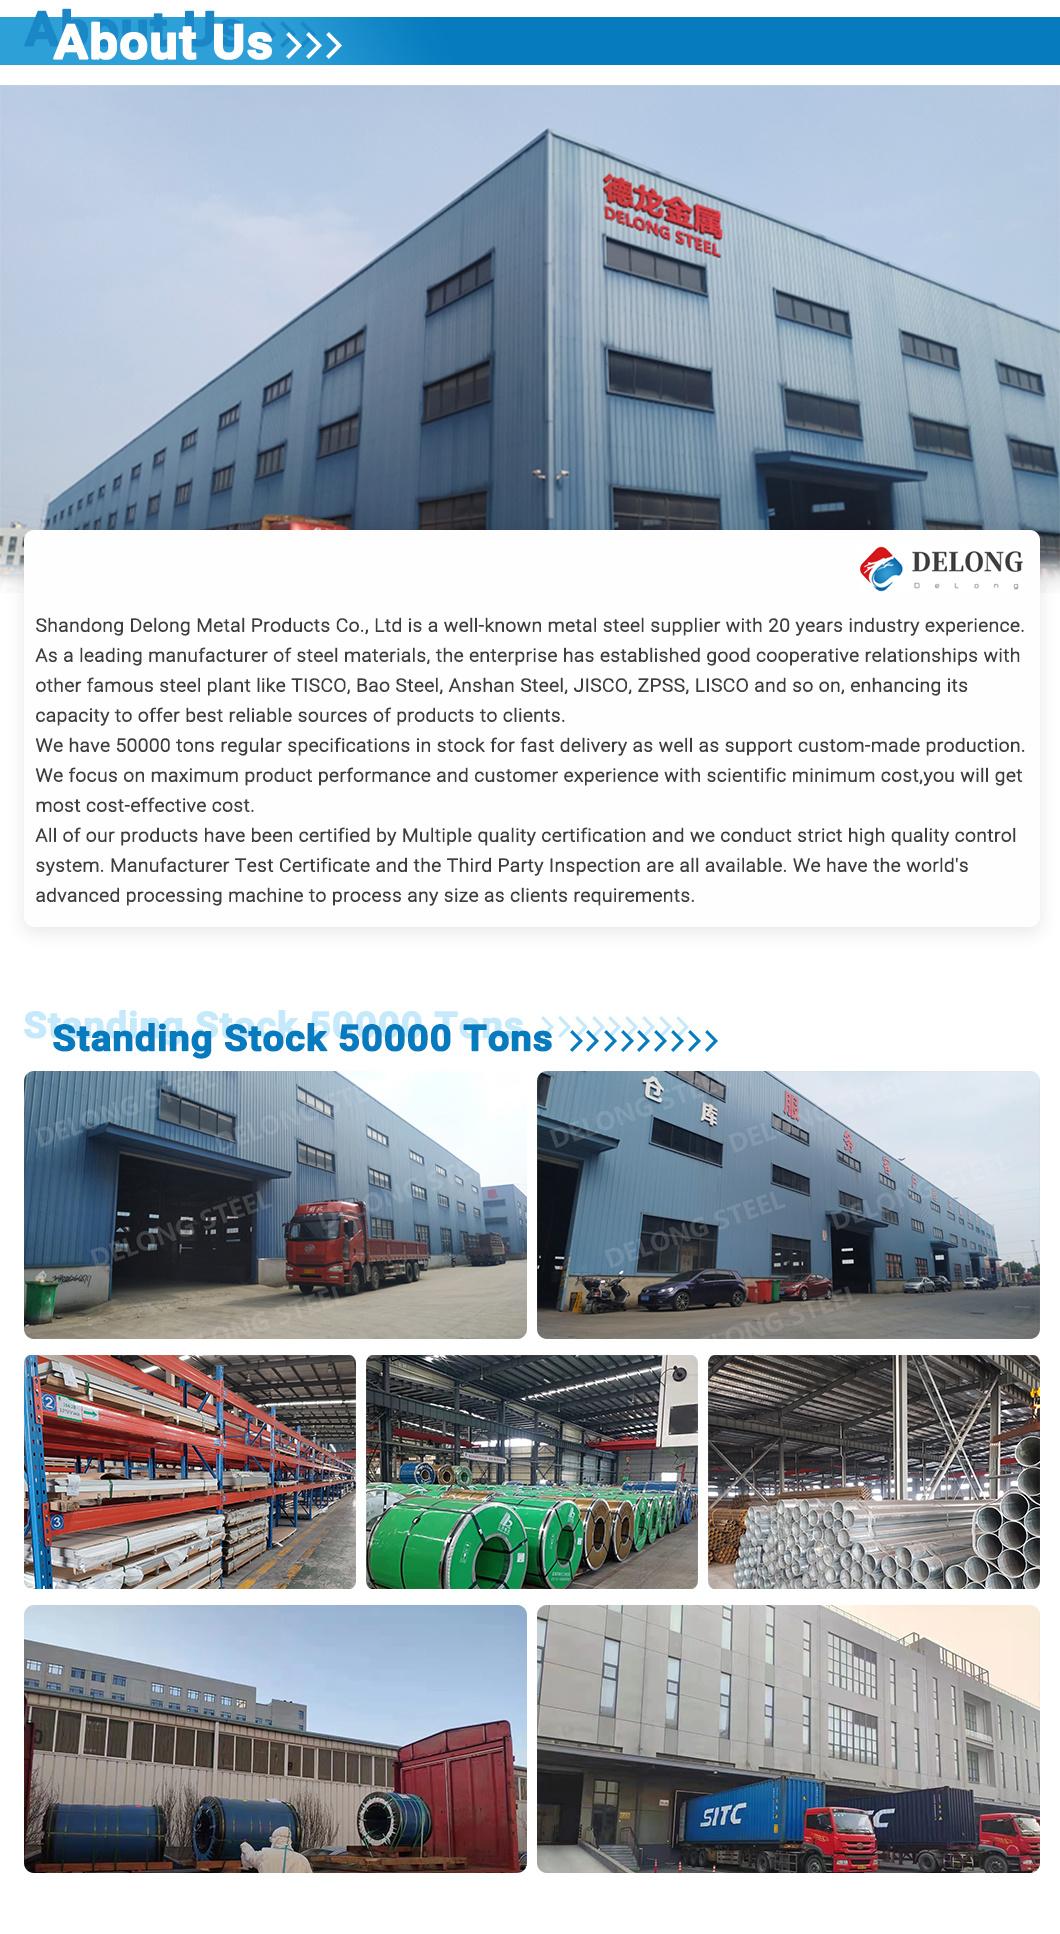 Factory Direct Sale Galvanized Steel Coil Roofing Tin Gi Coil